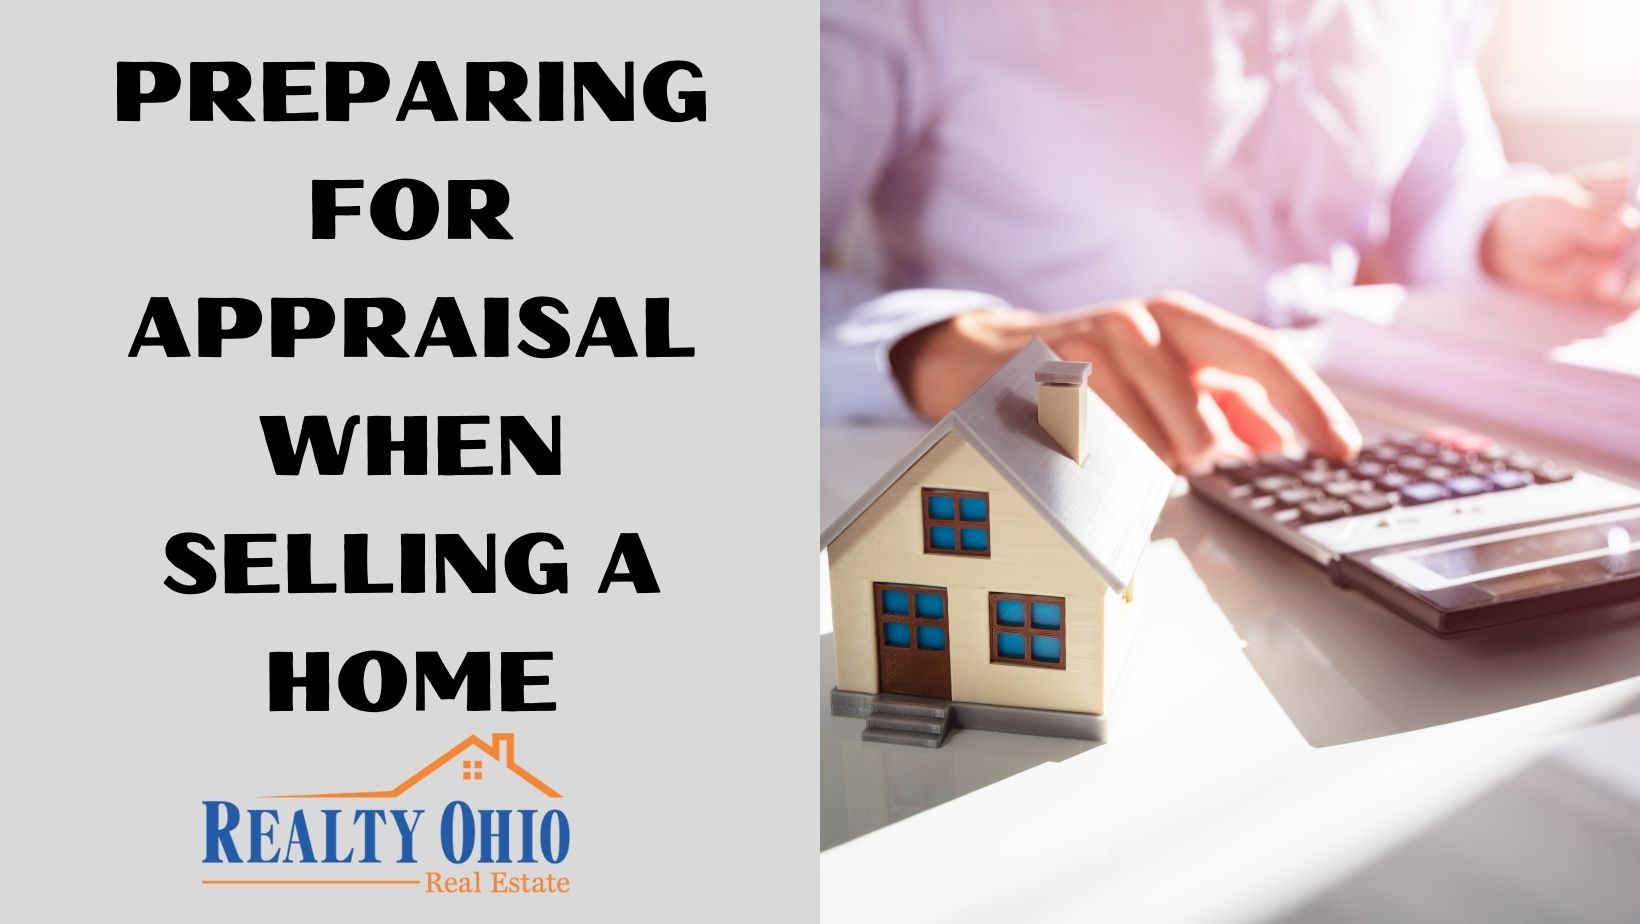 Preparing for Appraisal When Selling a Home